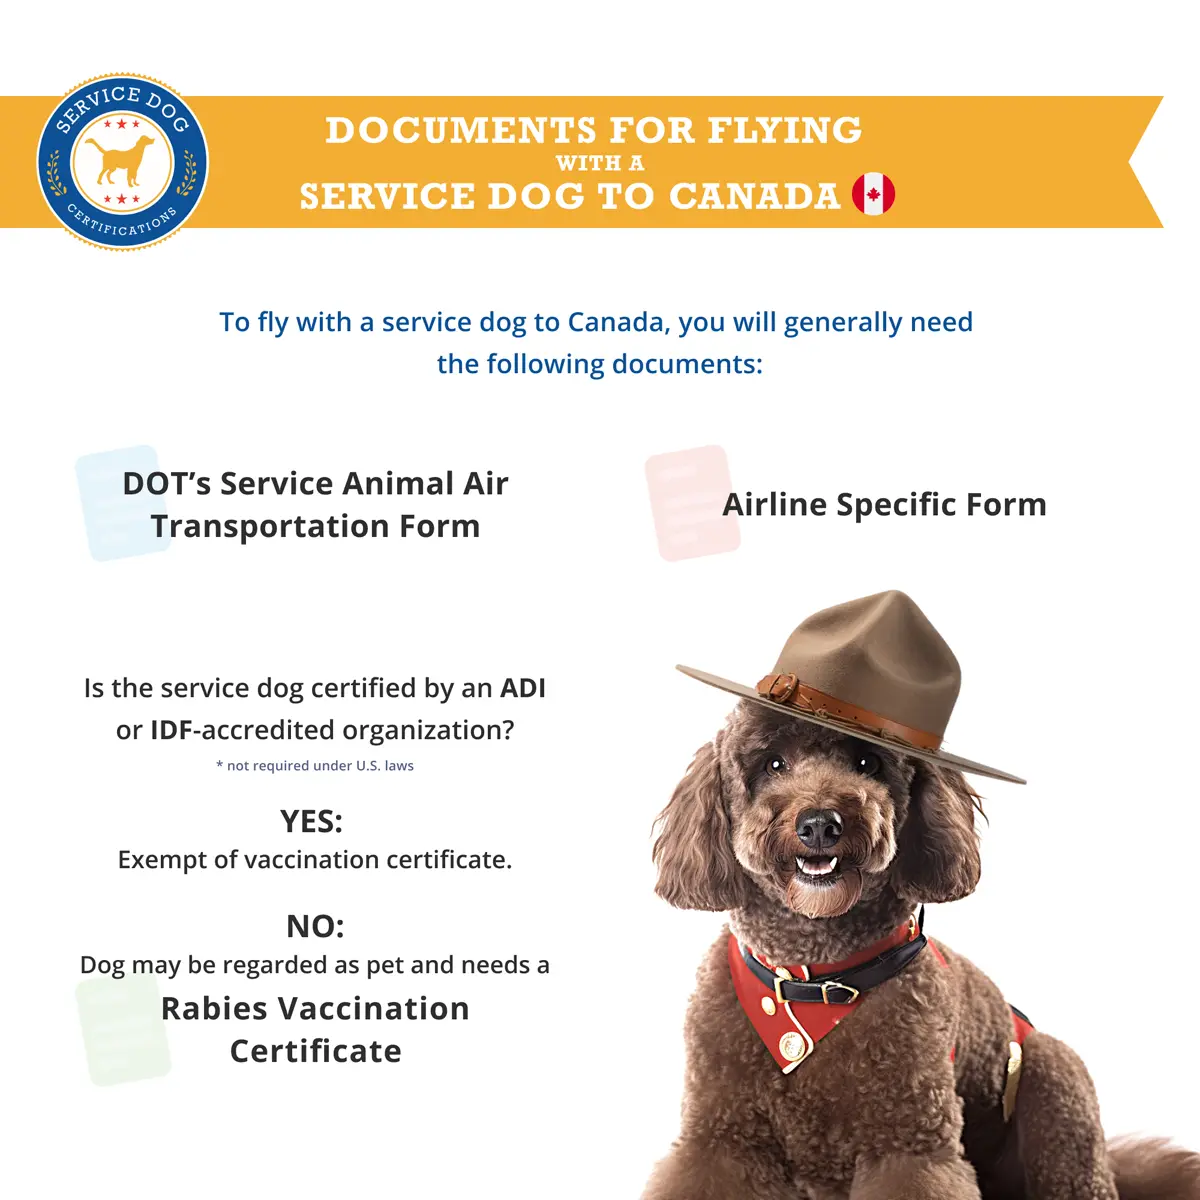 Documents for flying with a service dog to Canada - Infographic